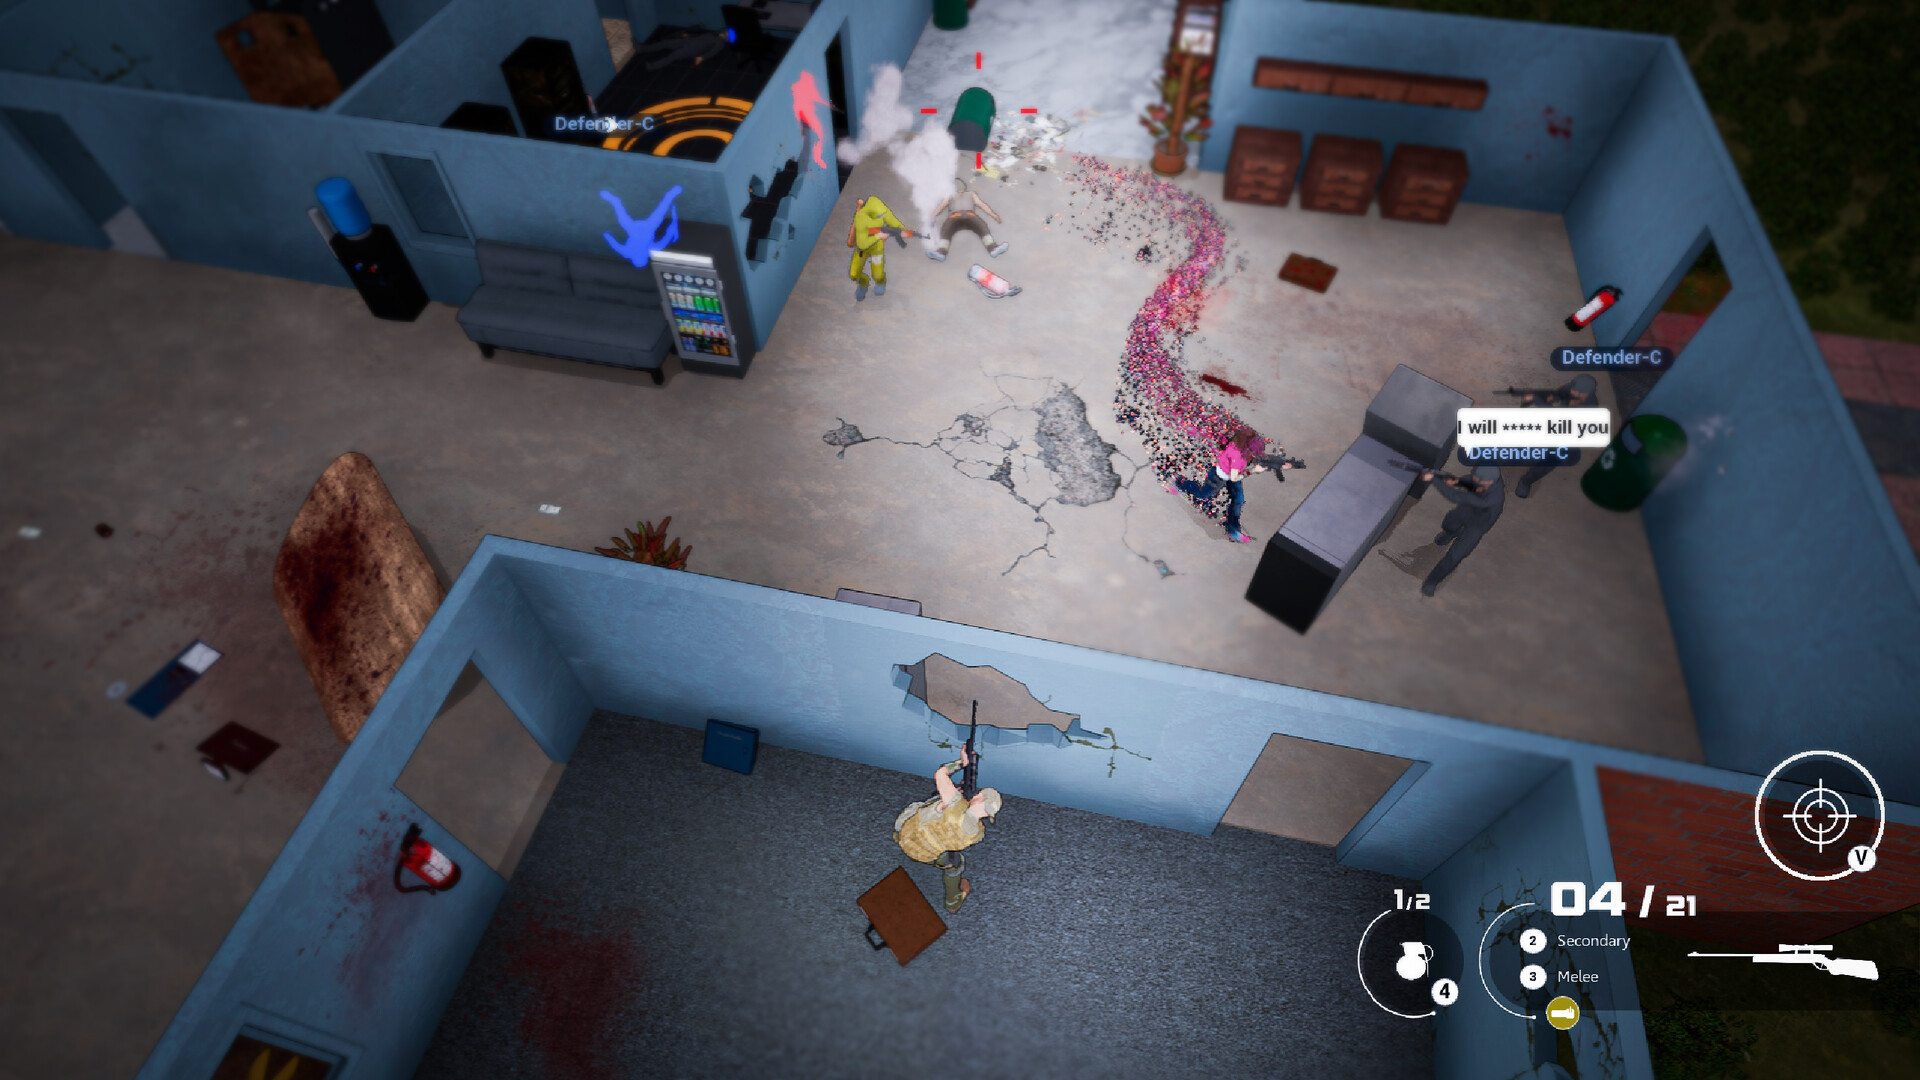 A fierce shooting fight Cops and Rebels in a building. Image is from game Shoot On Sight.